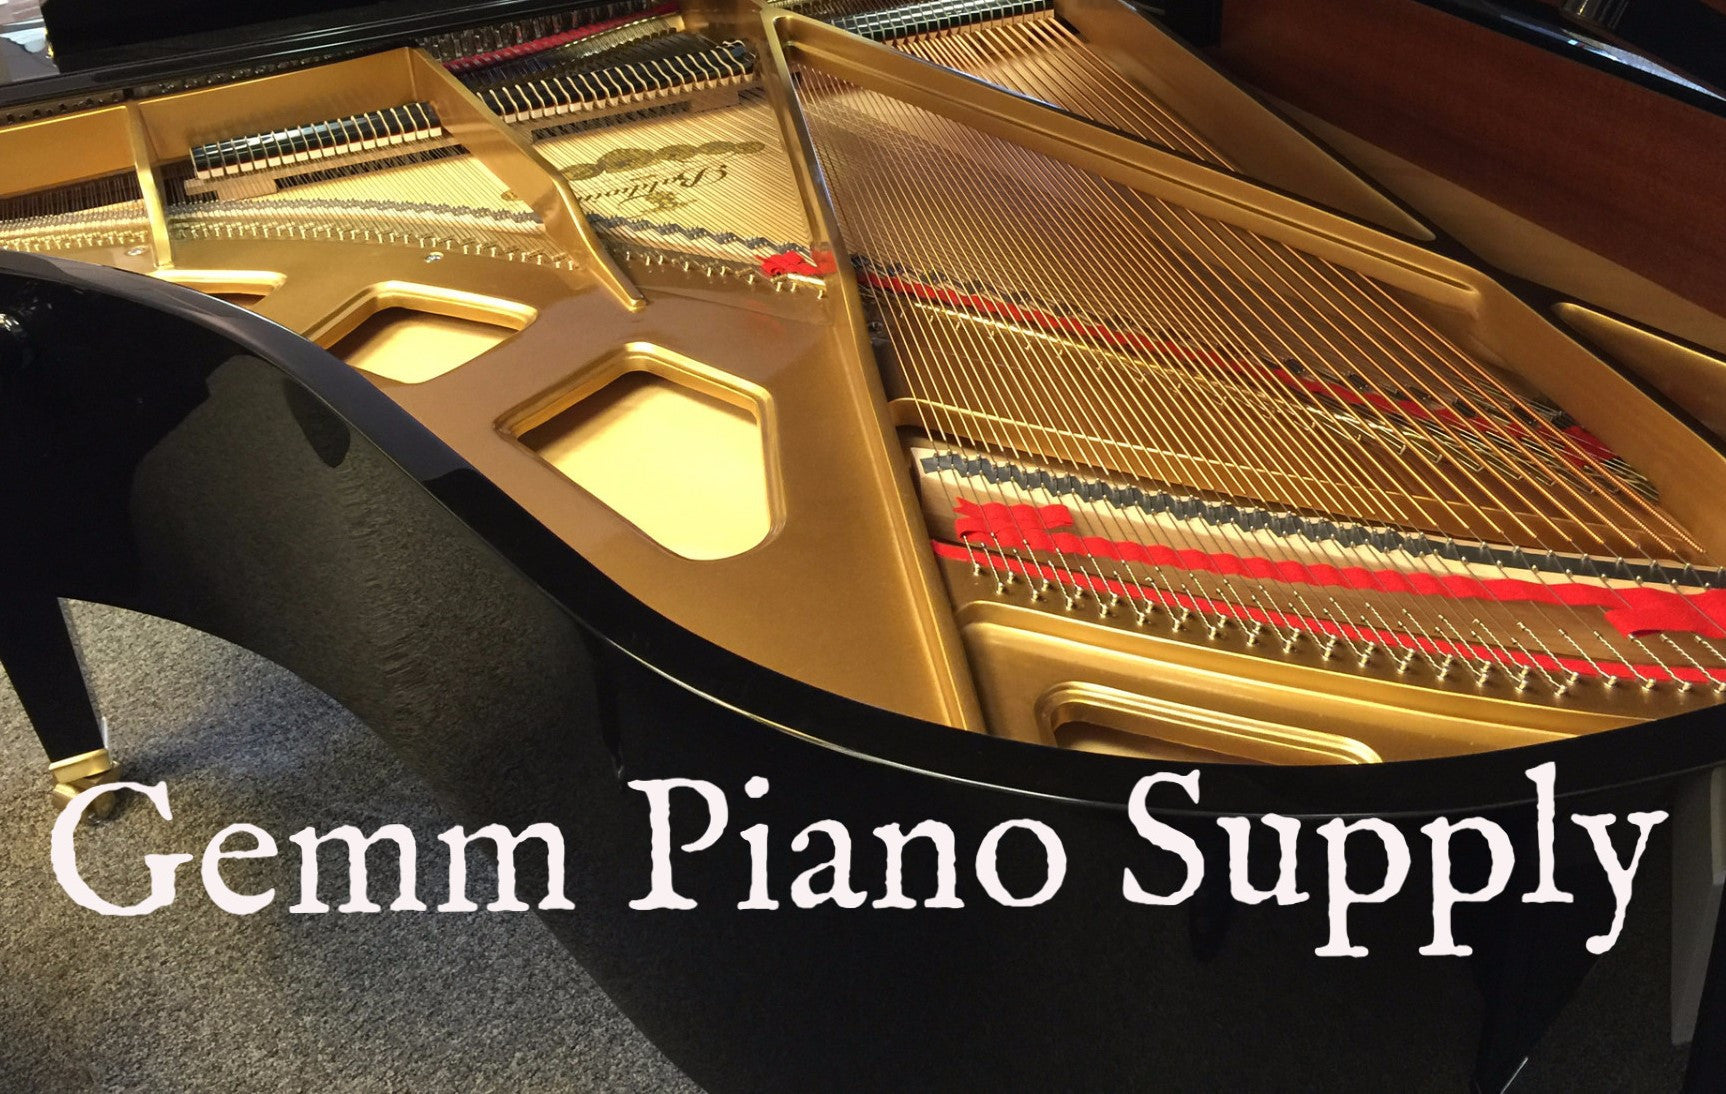 OUR OTHER STORE "GEMM PIANO SUPPLY"